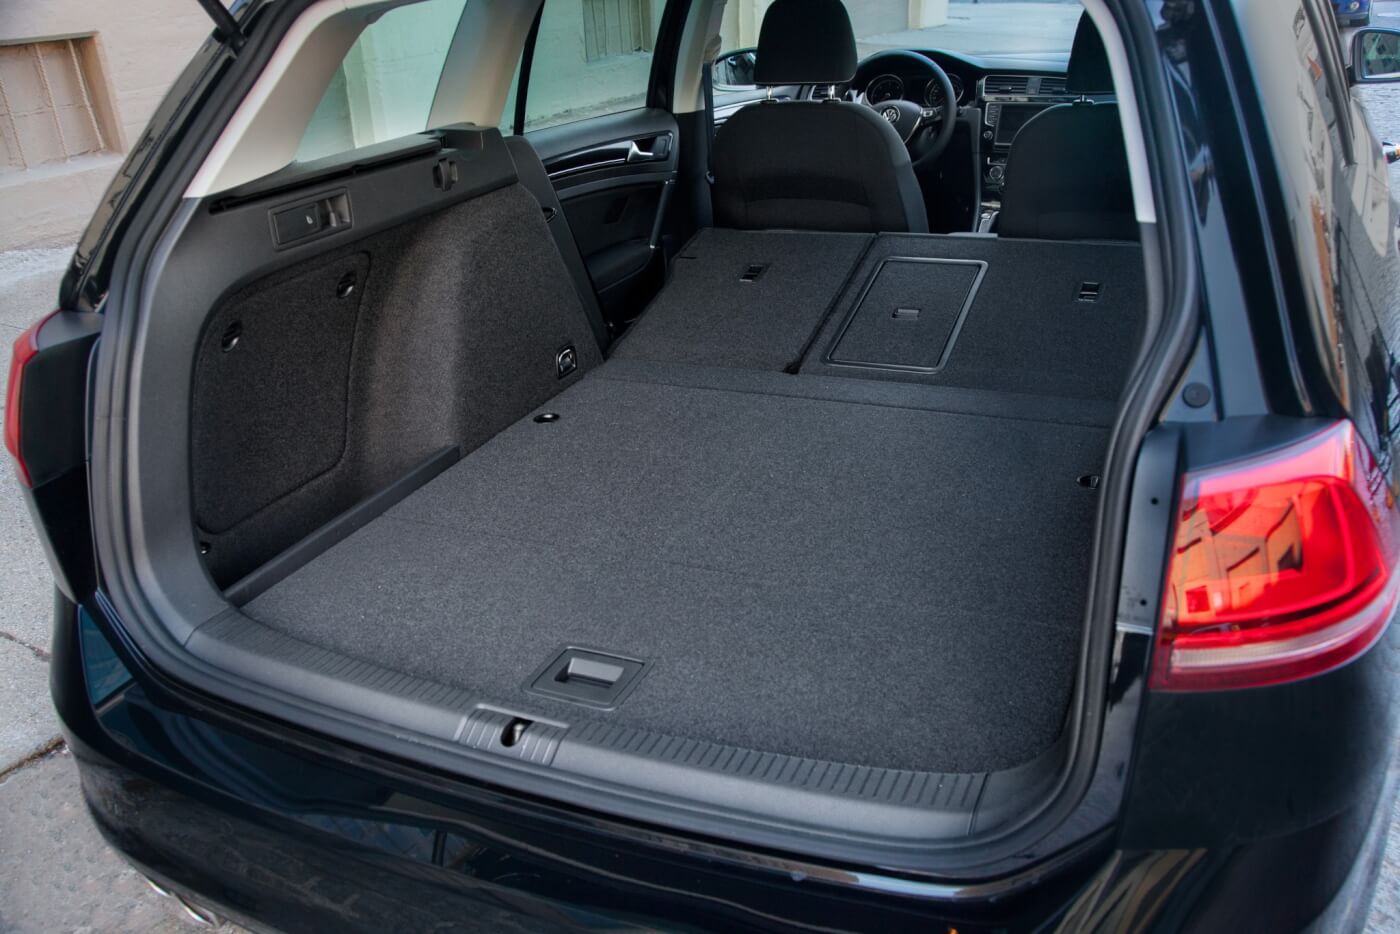 Here you can see a comparison of the Golf SportWagen’s cargo capacity with the rear seats up and folded down. This little car has lots of carrying space: 30.4-Cu. Ft. with the rear seats up and 66.5-Cu. Ft. with them down. 